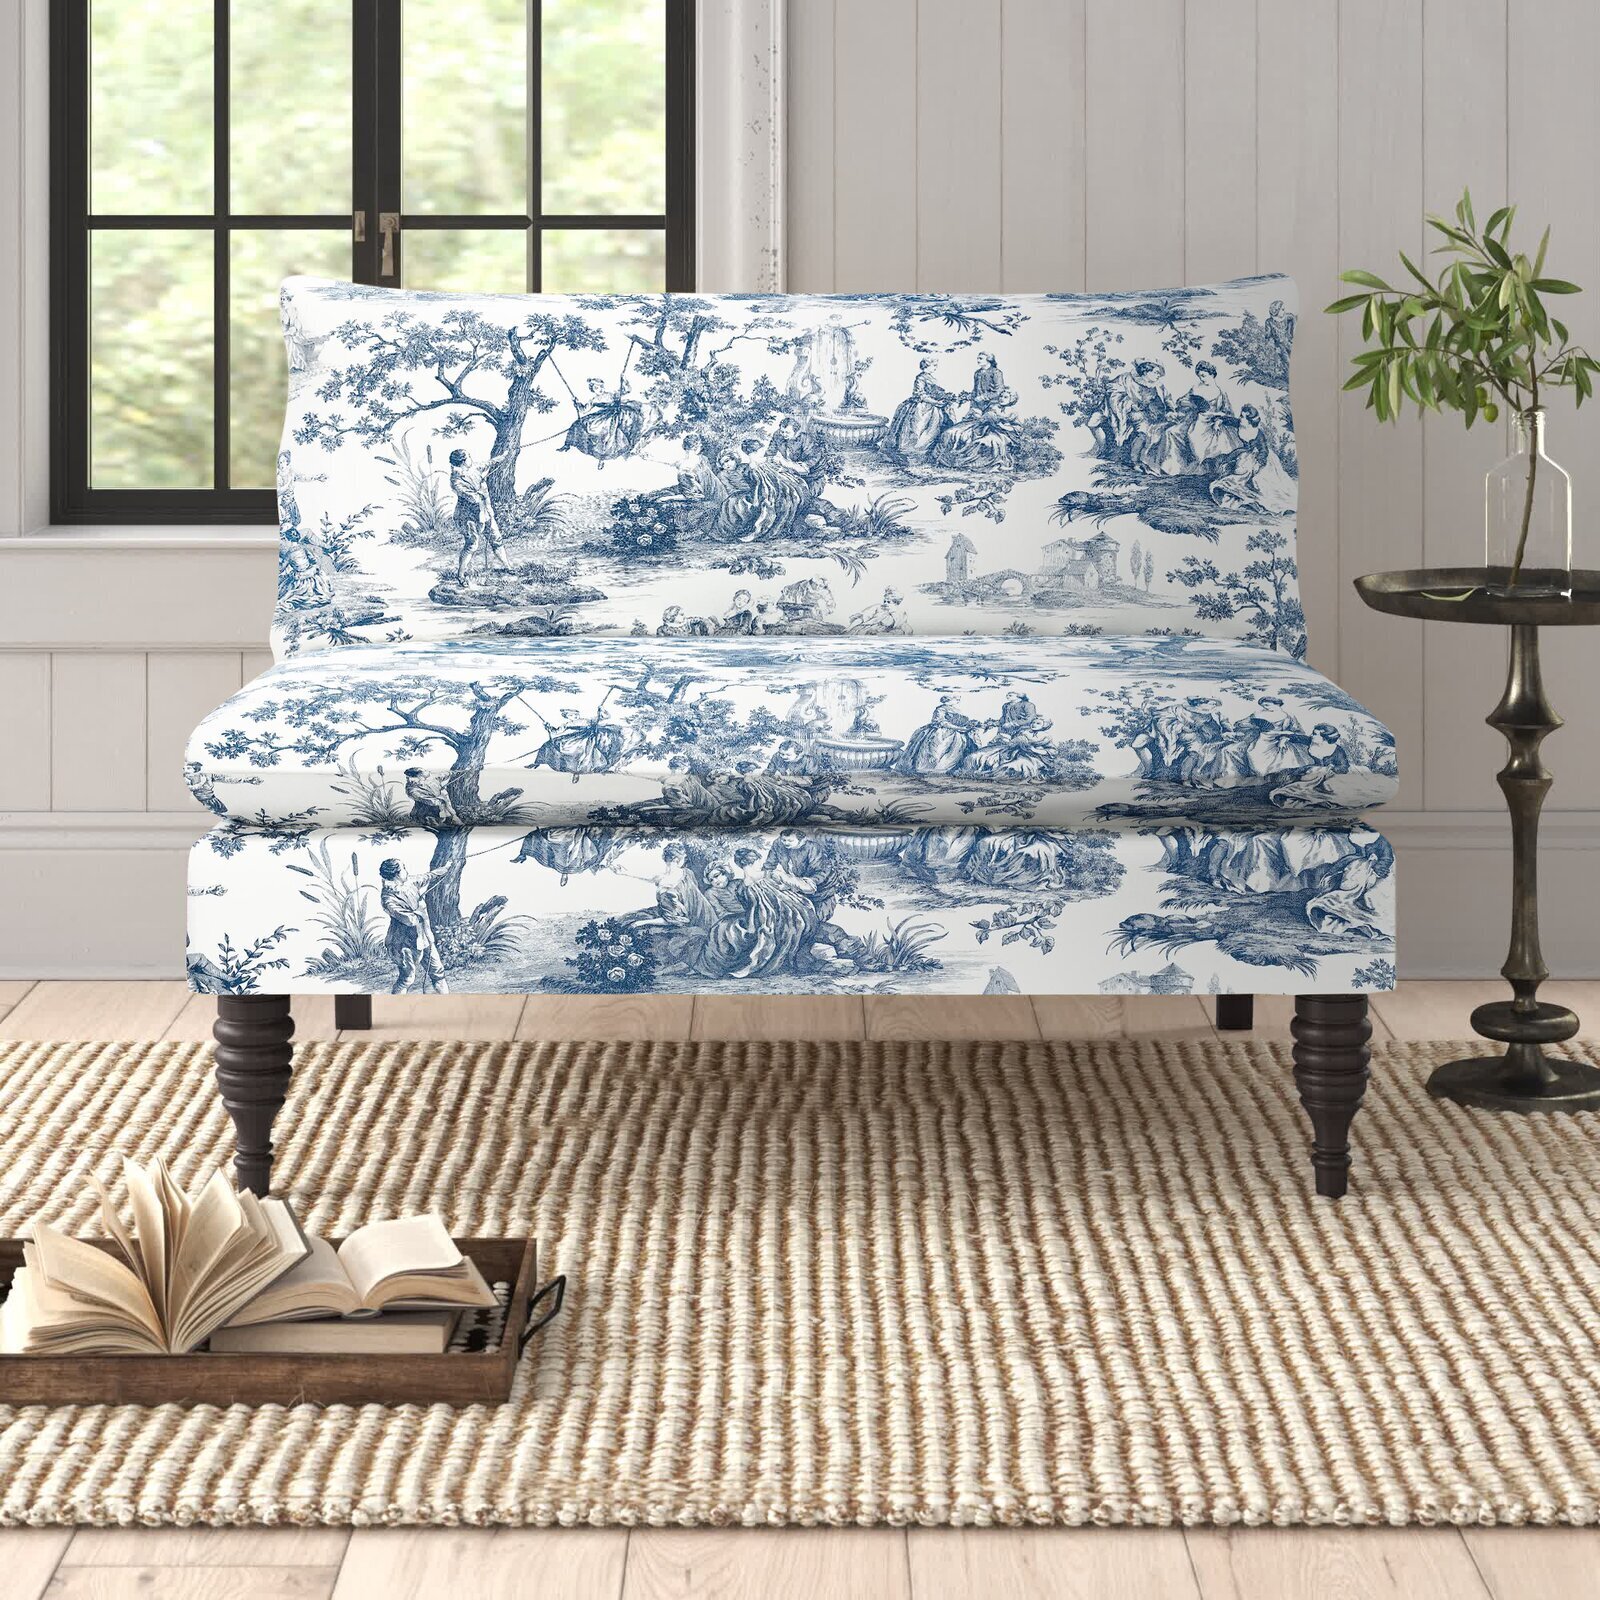 Vintage Inspired French Country Patterned Seat